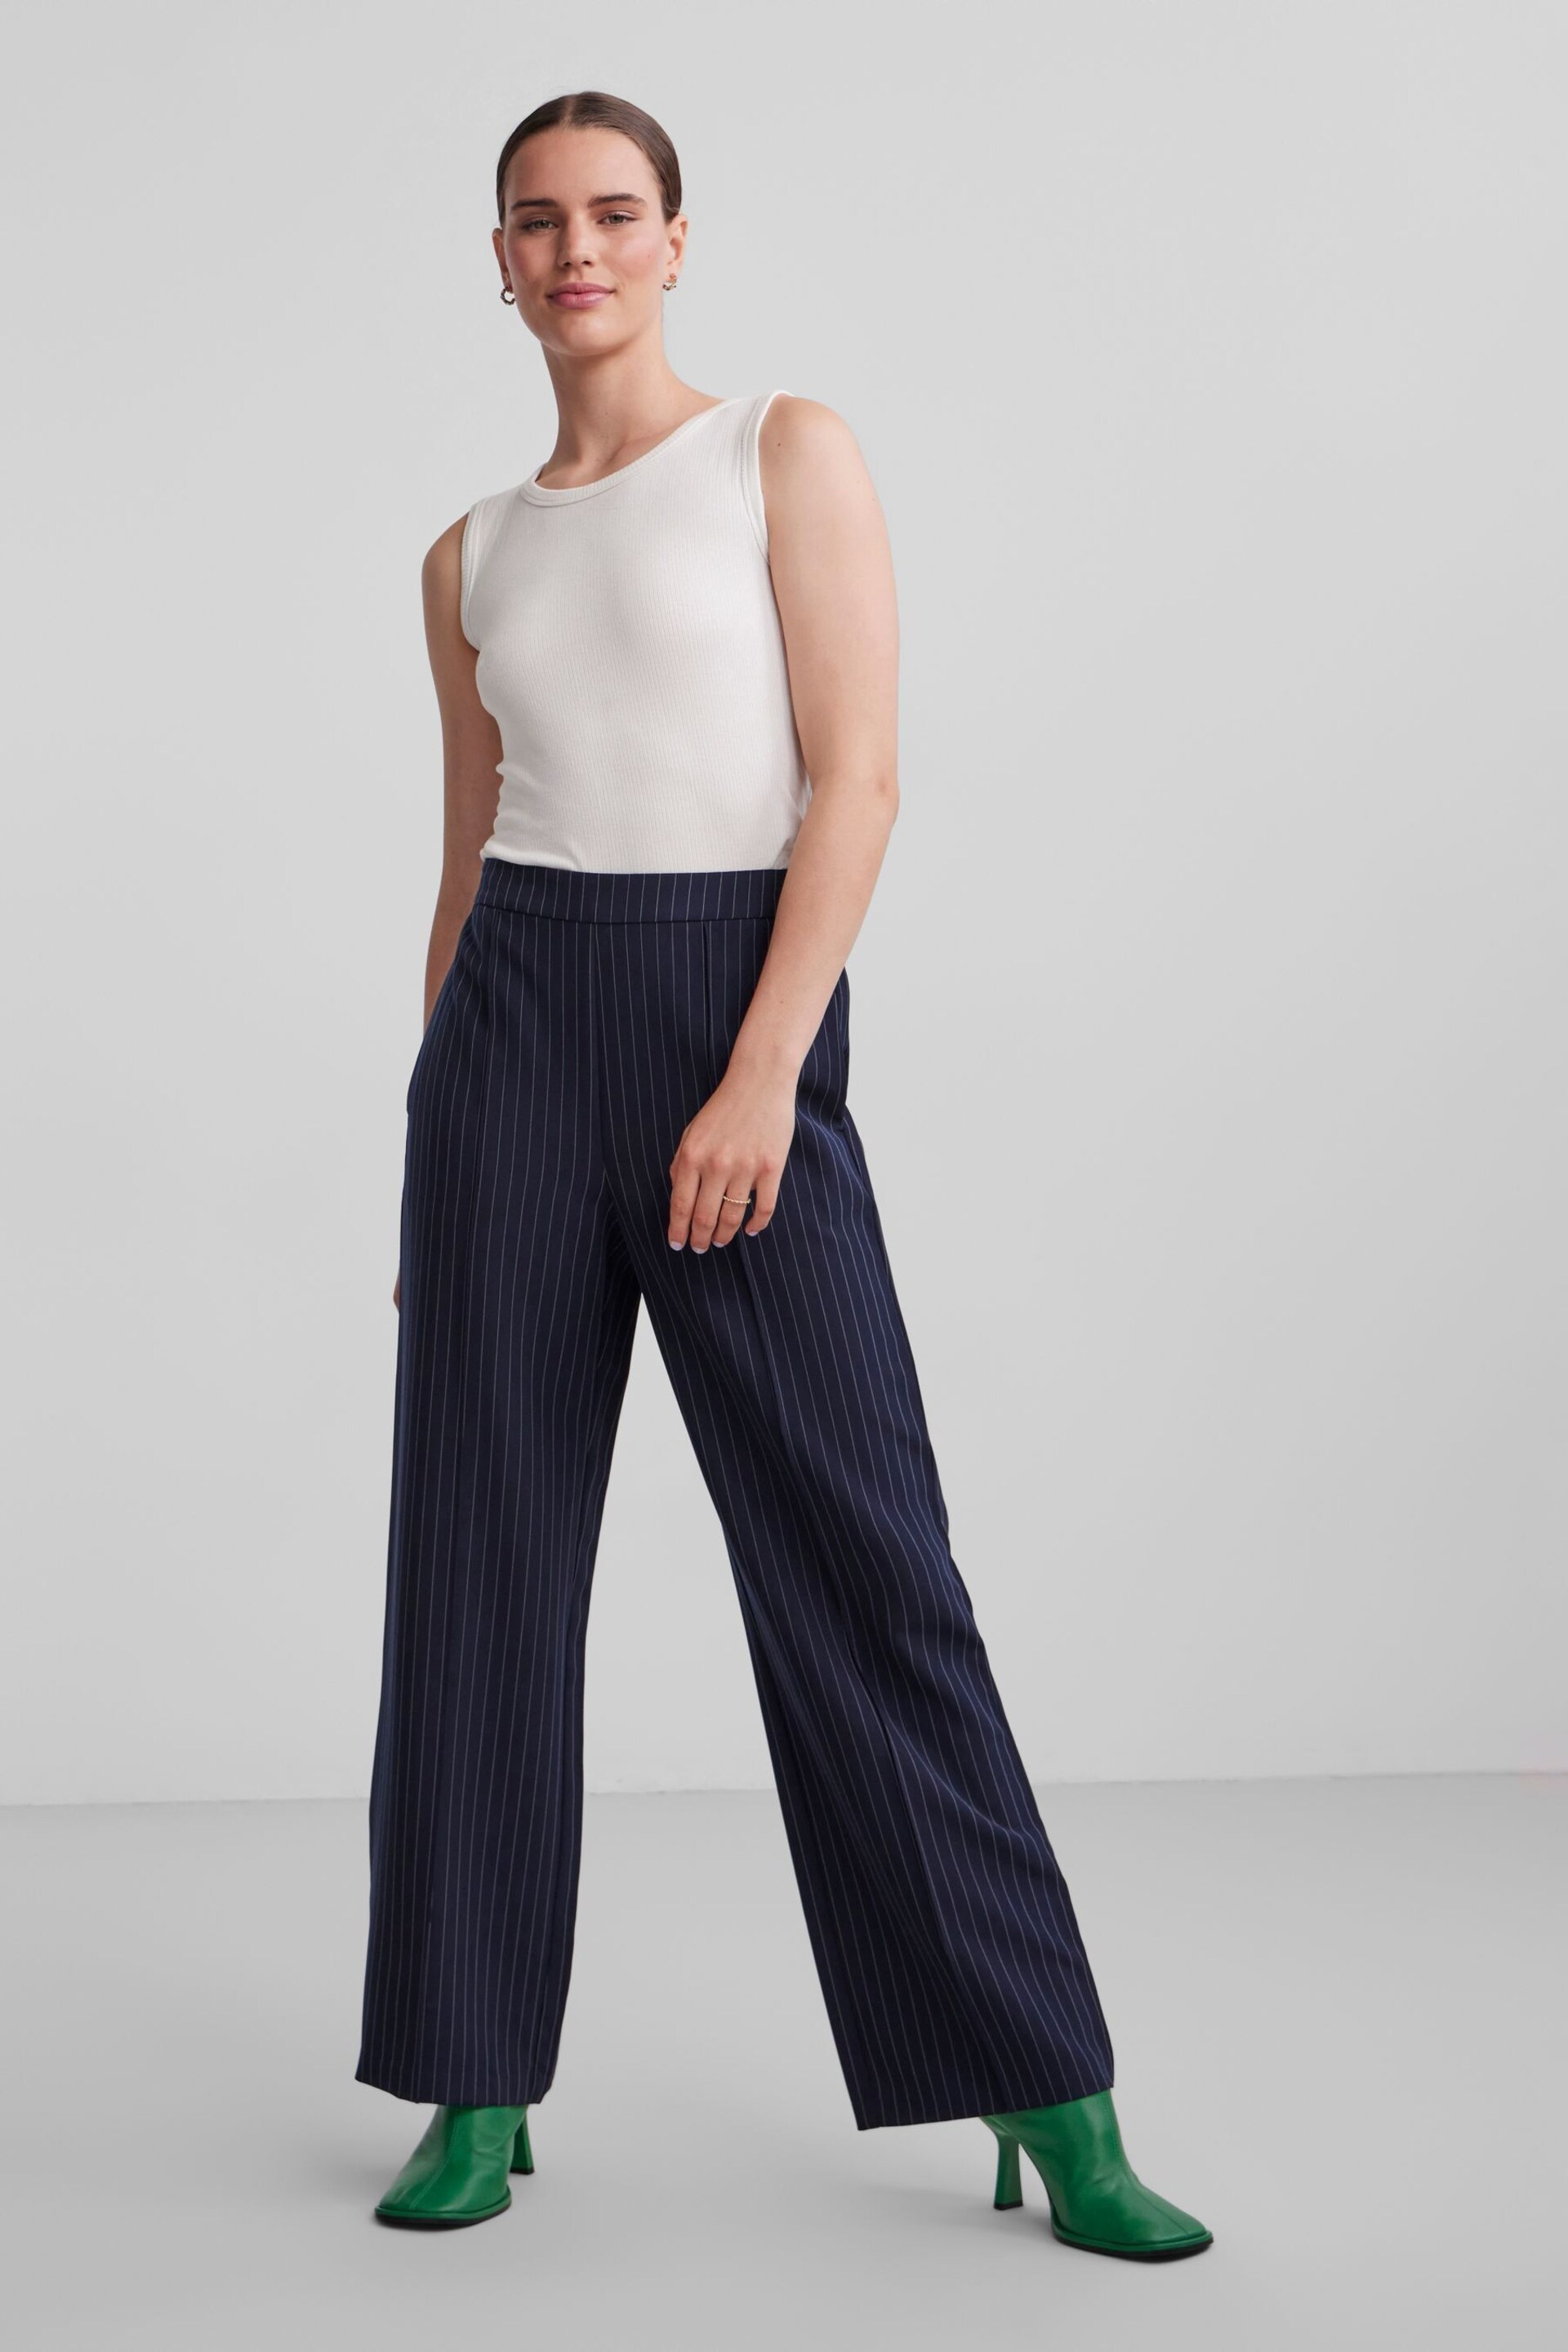 PIECES Blue Pinstripe Wide Leg Stretch Tailored Trousers - Image 2 of 5